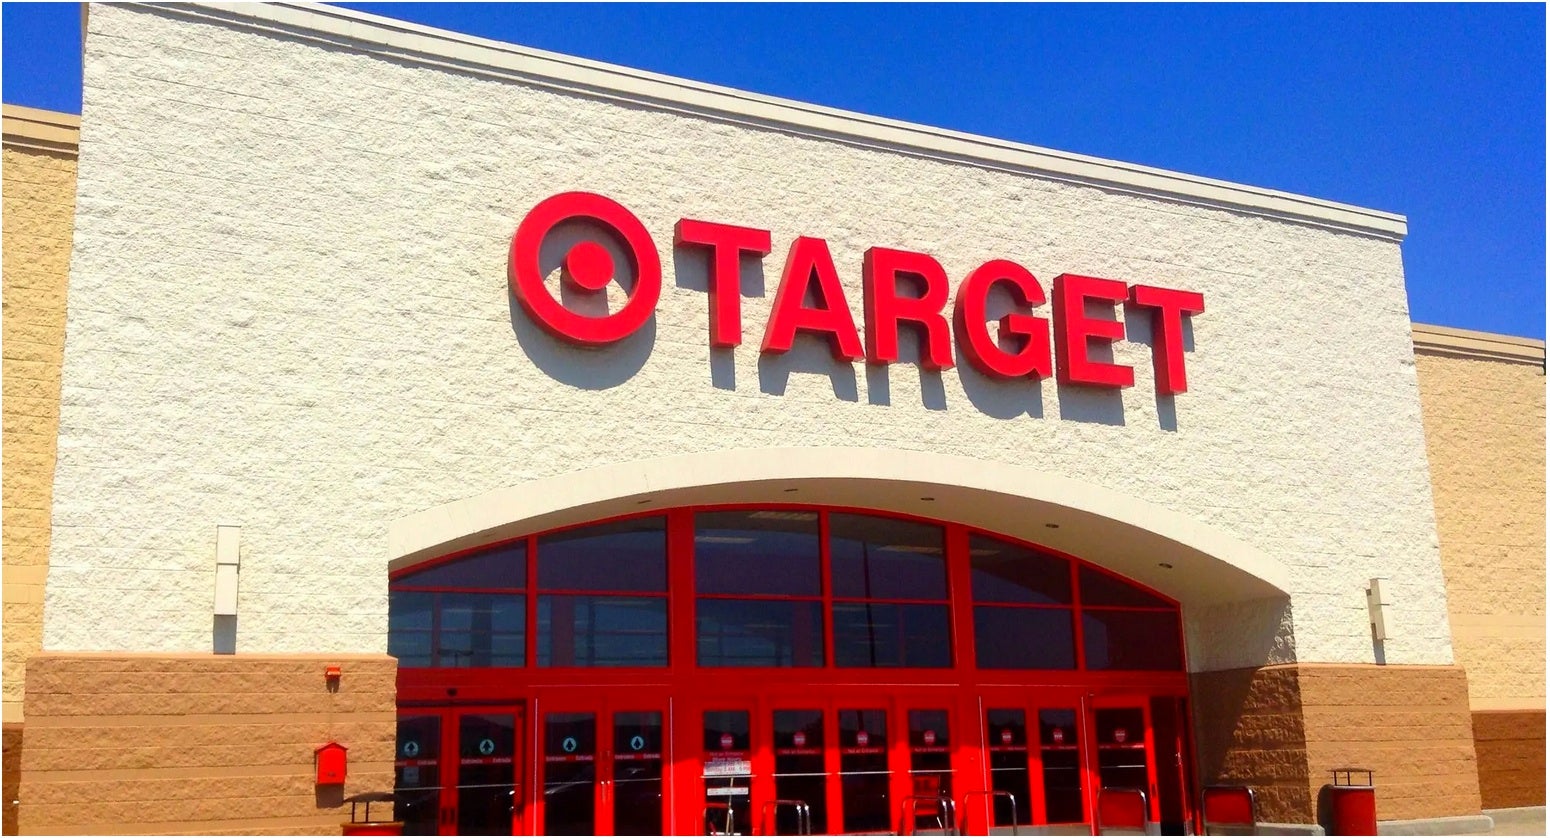 Target Gets Short Changed By $400 Million Due To Significant 'Shrinkage,' Theft